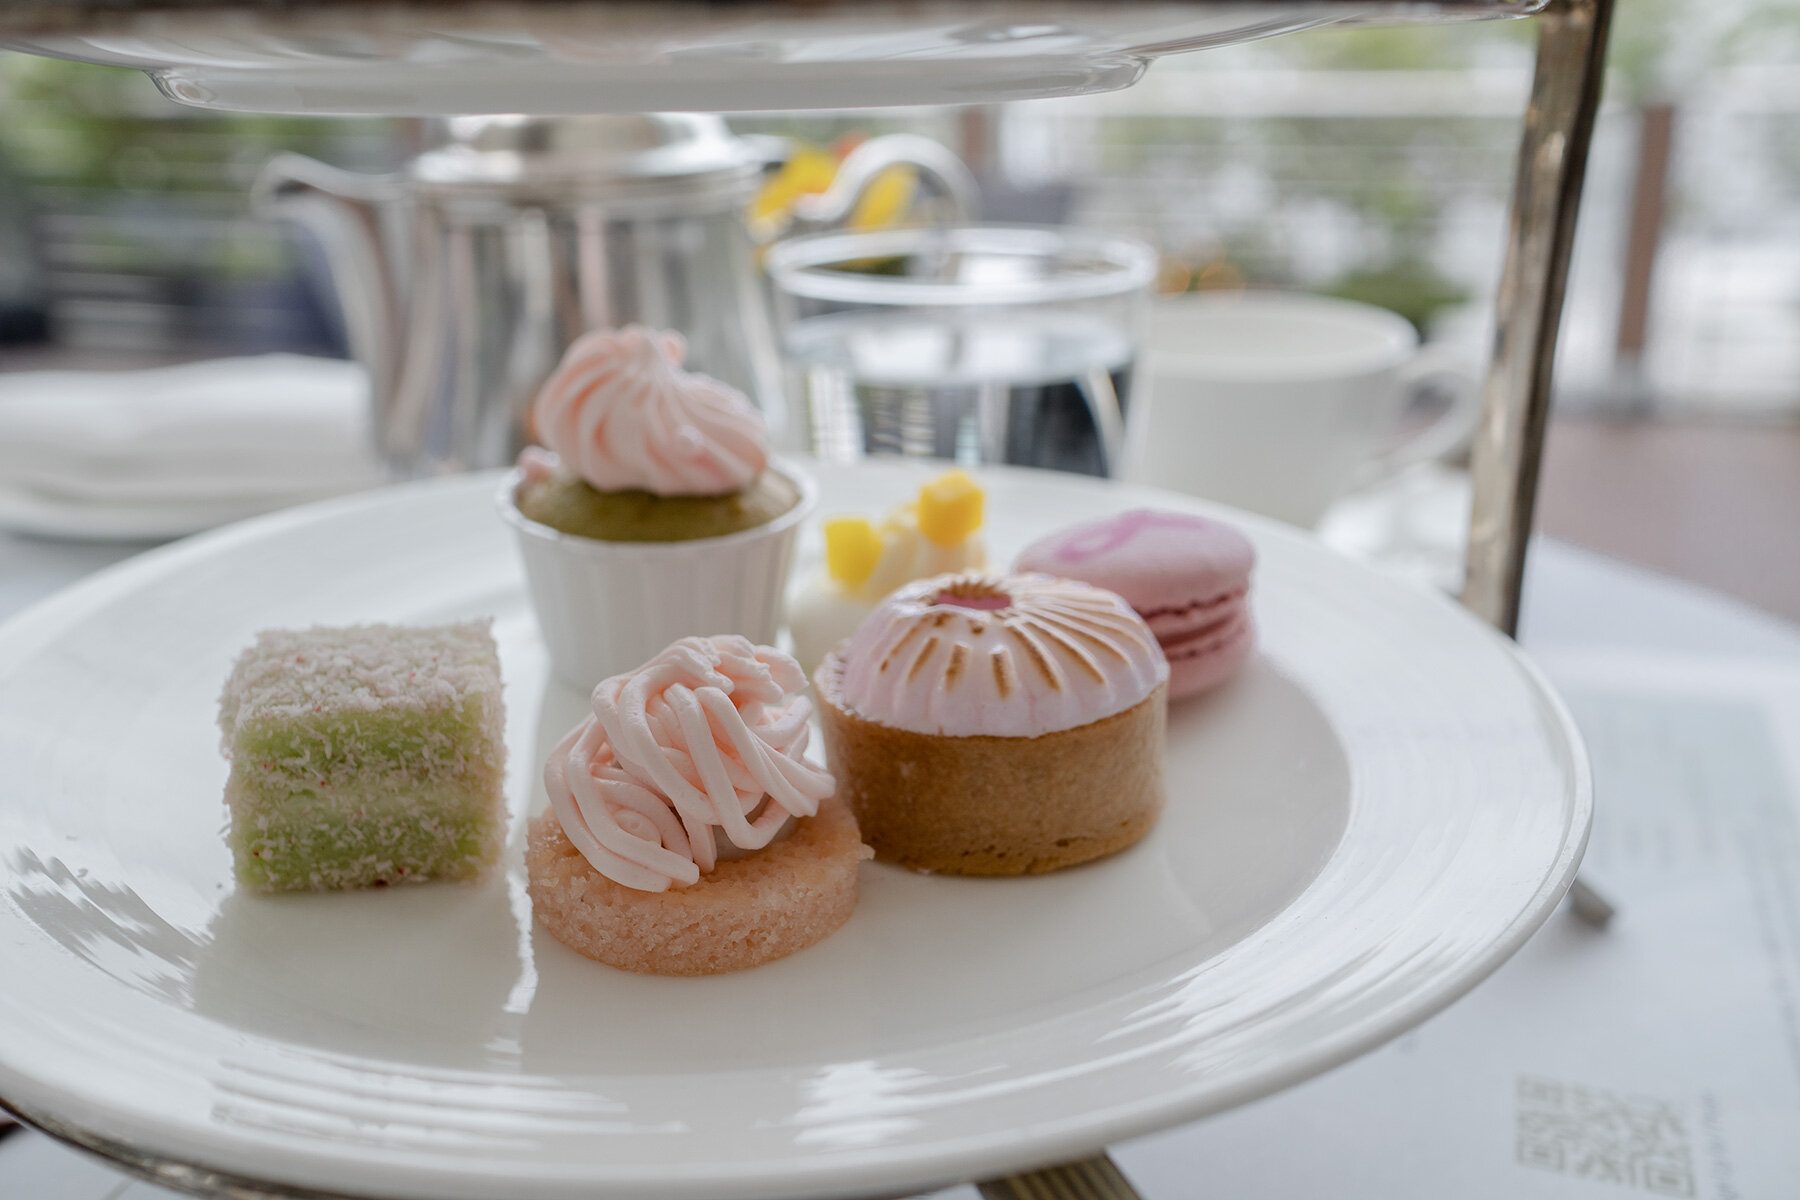 The Landing Points’ Pink Afternoon Tea in support of awareness for breast cancer, with blush delicacies like the Coconut Pandan Lamington and Yoghurt Mango Passion Pavlova.